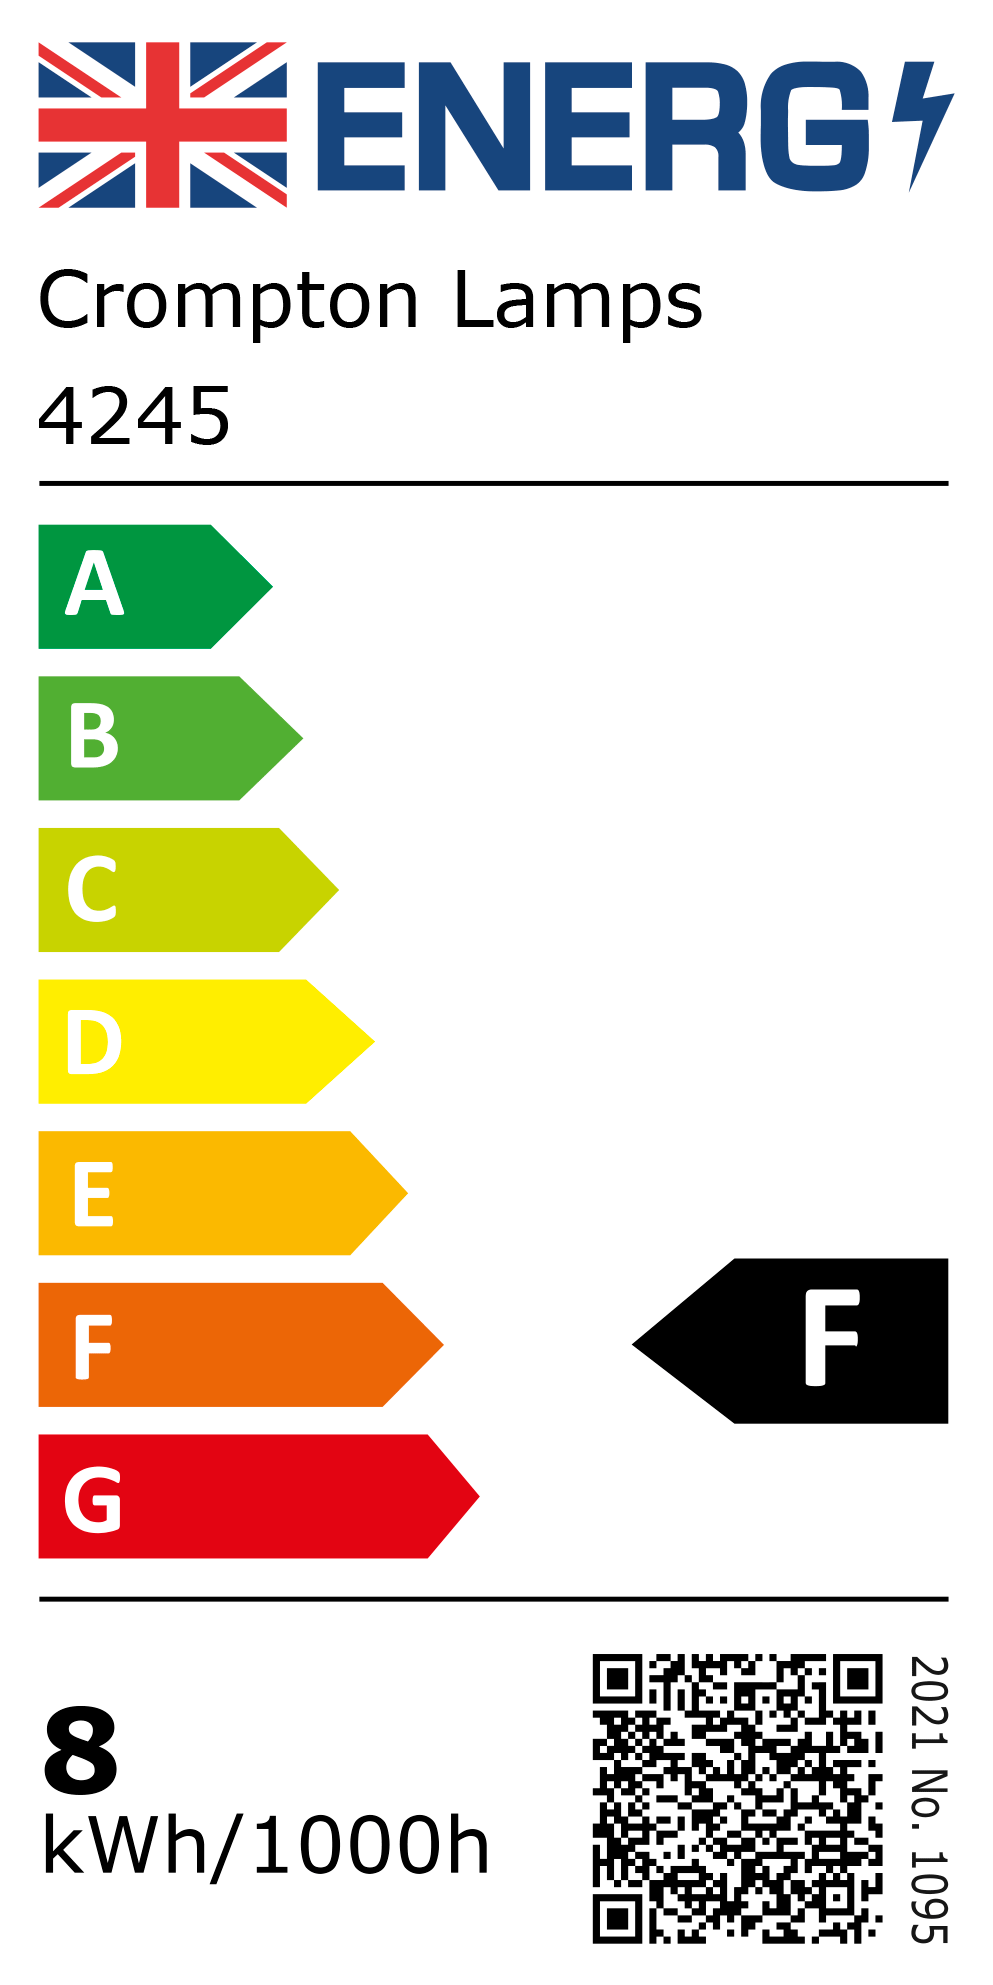 New 2021 Energy Rating Label: Stock Code 4245